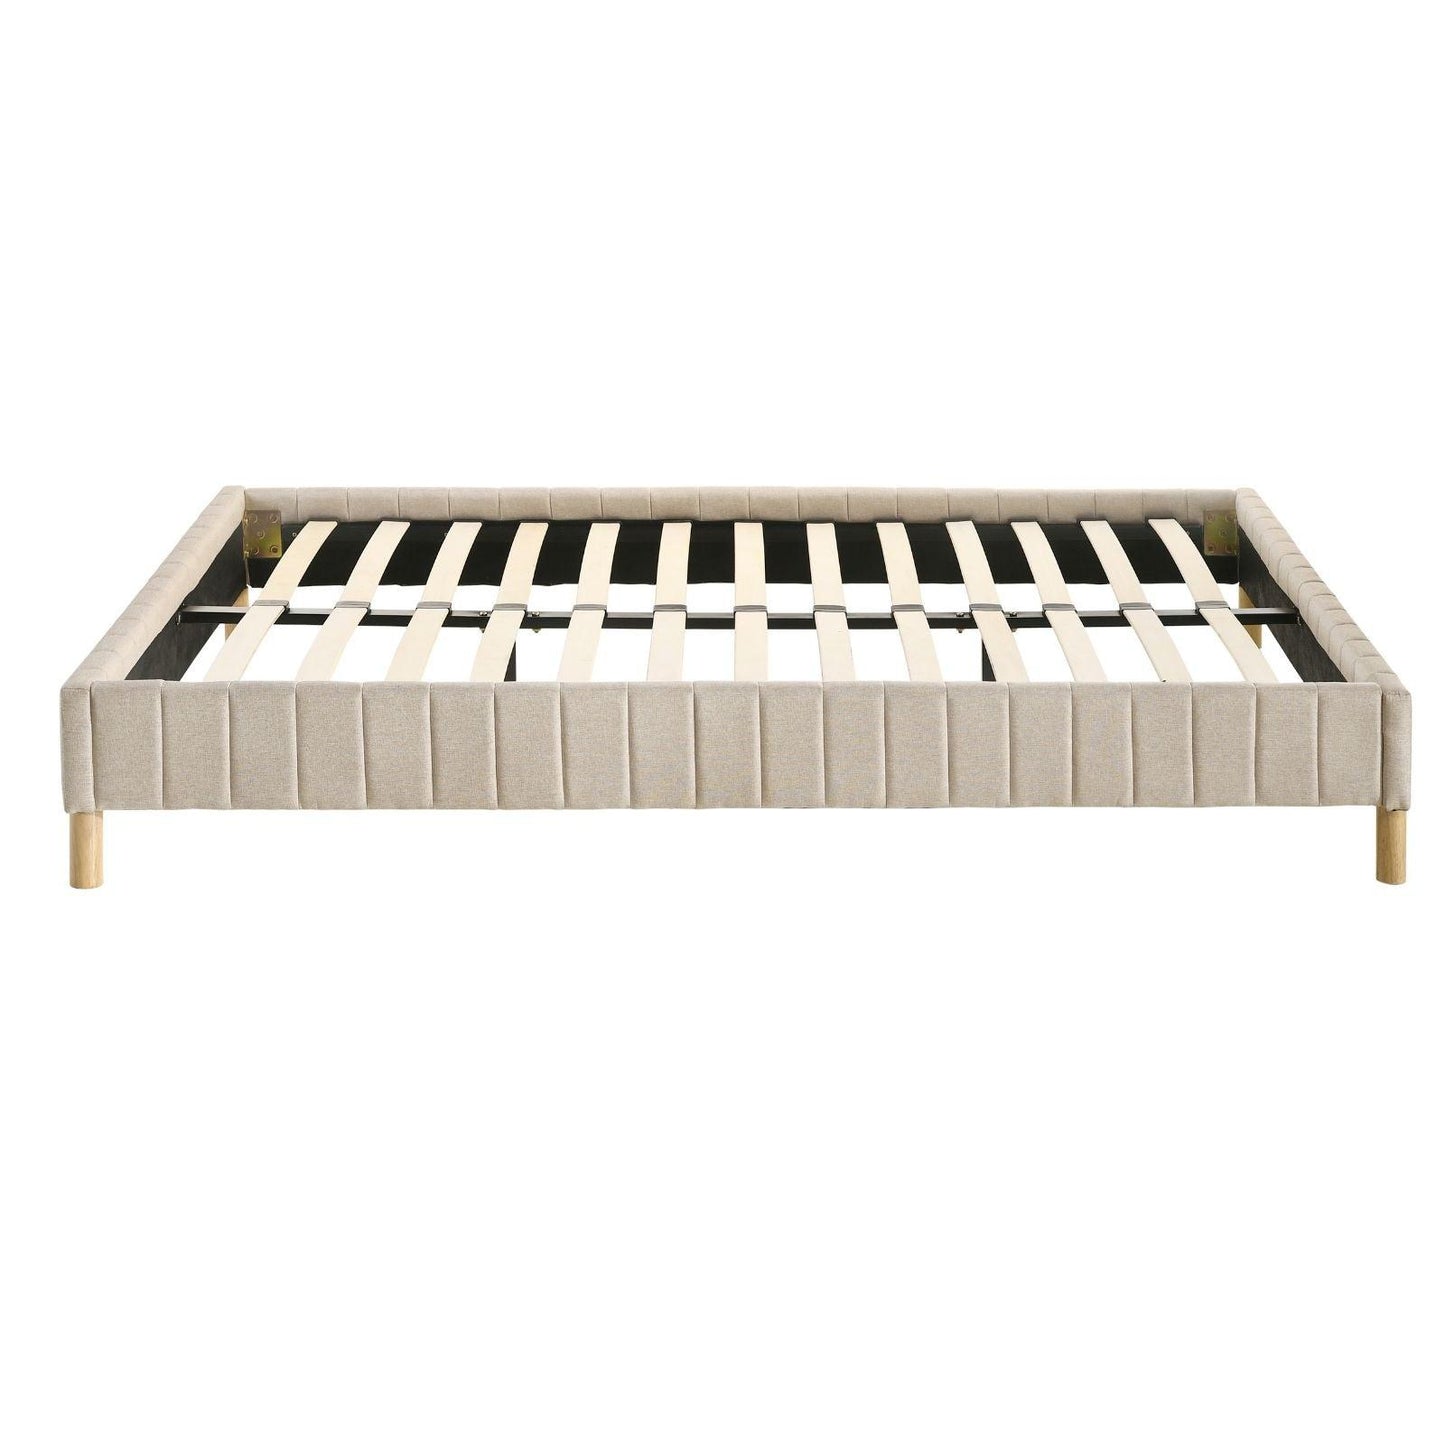 Contemporary Platform Bed Base Fabric Upholestered with Timber Slat King Single in Beige